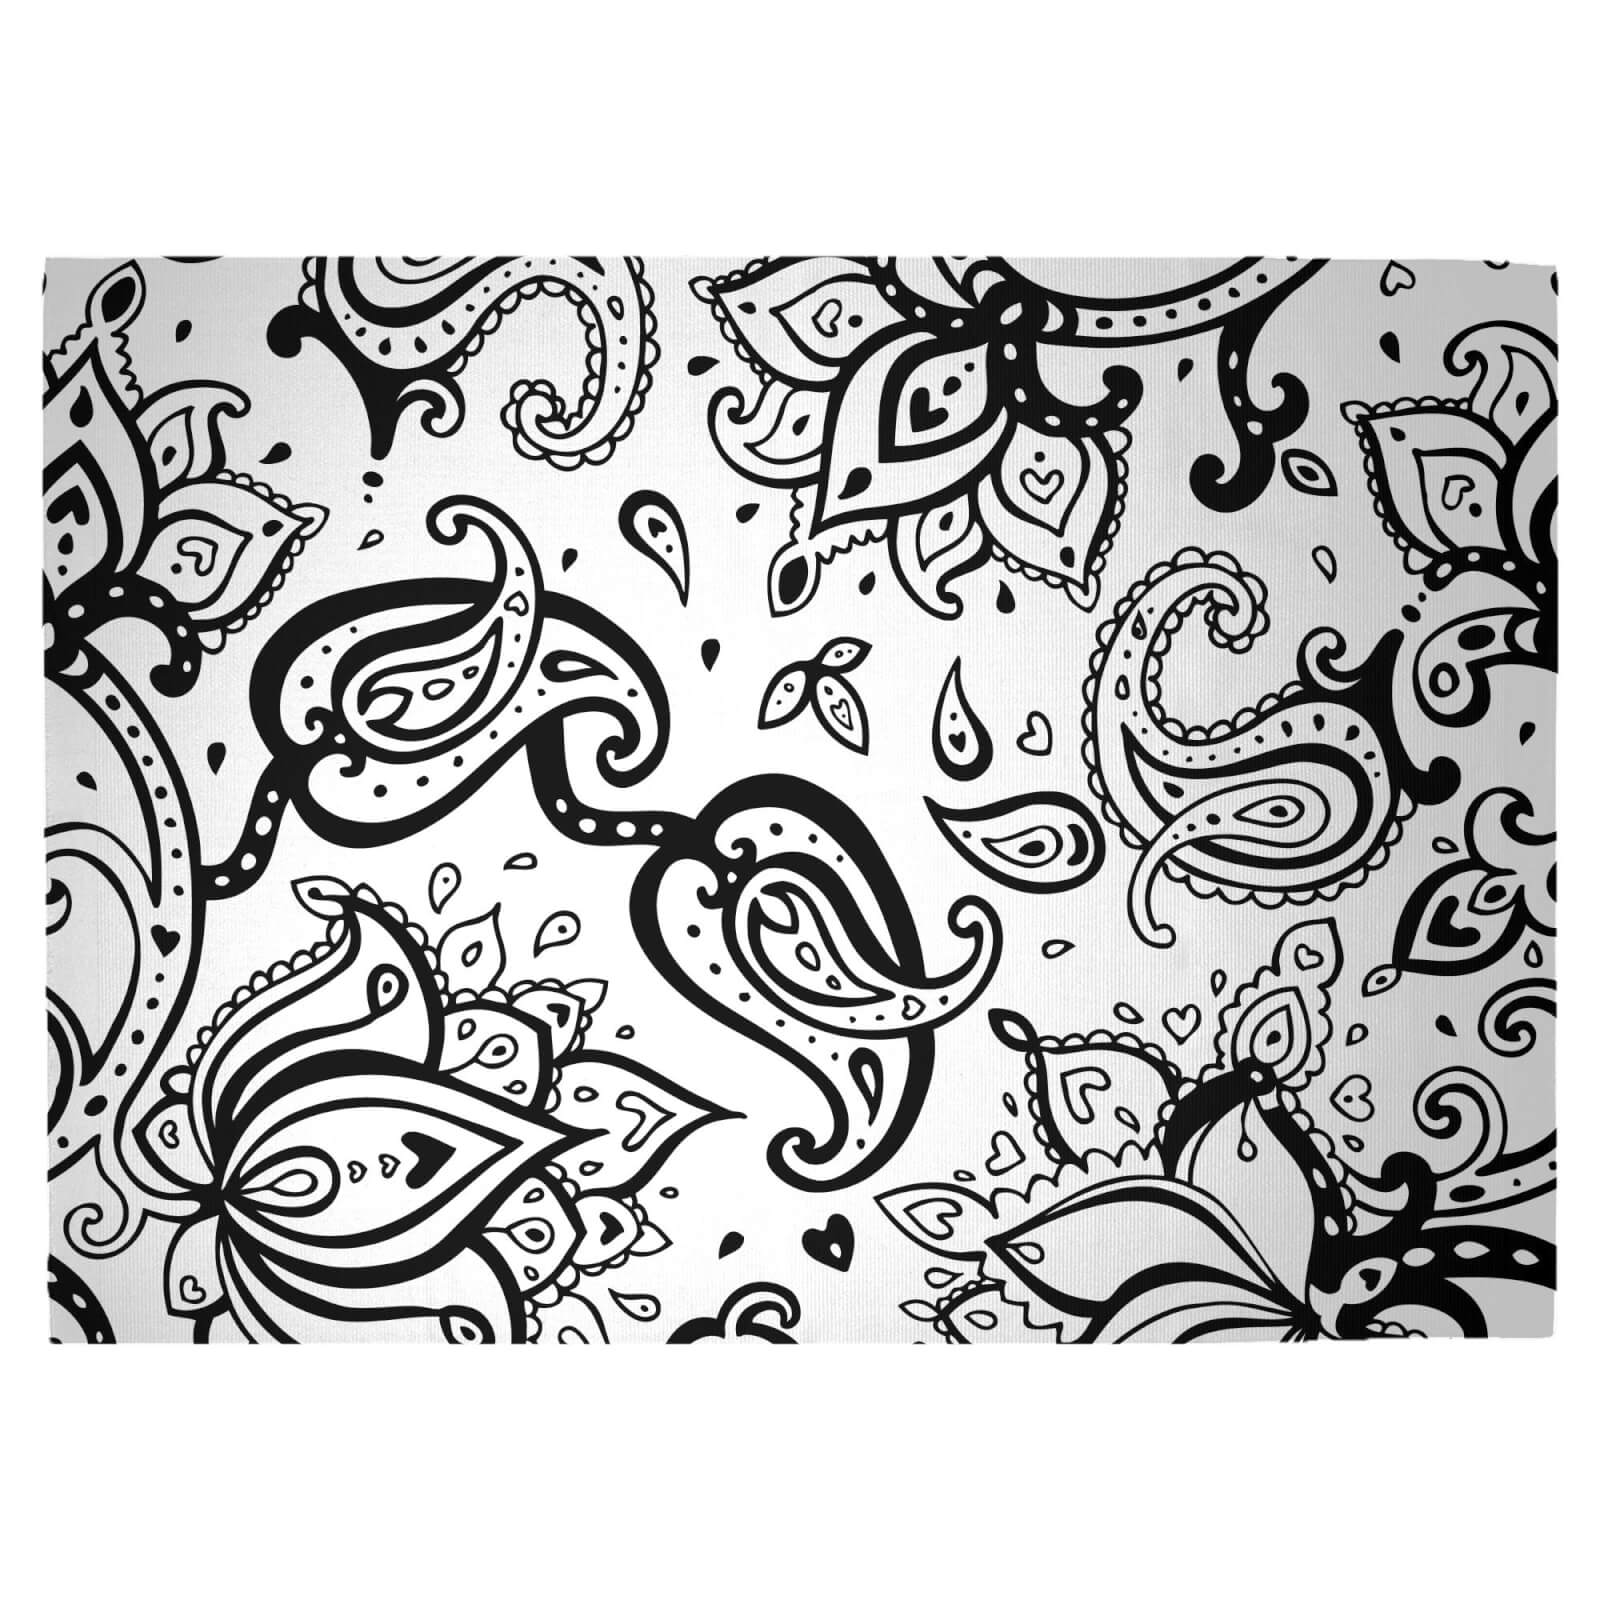 Floral Paisley Woven Rug - Large